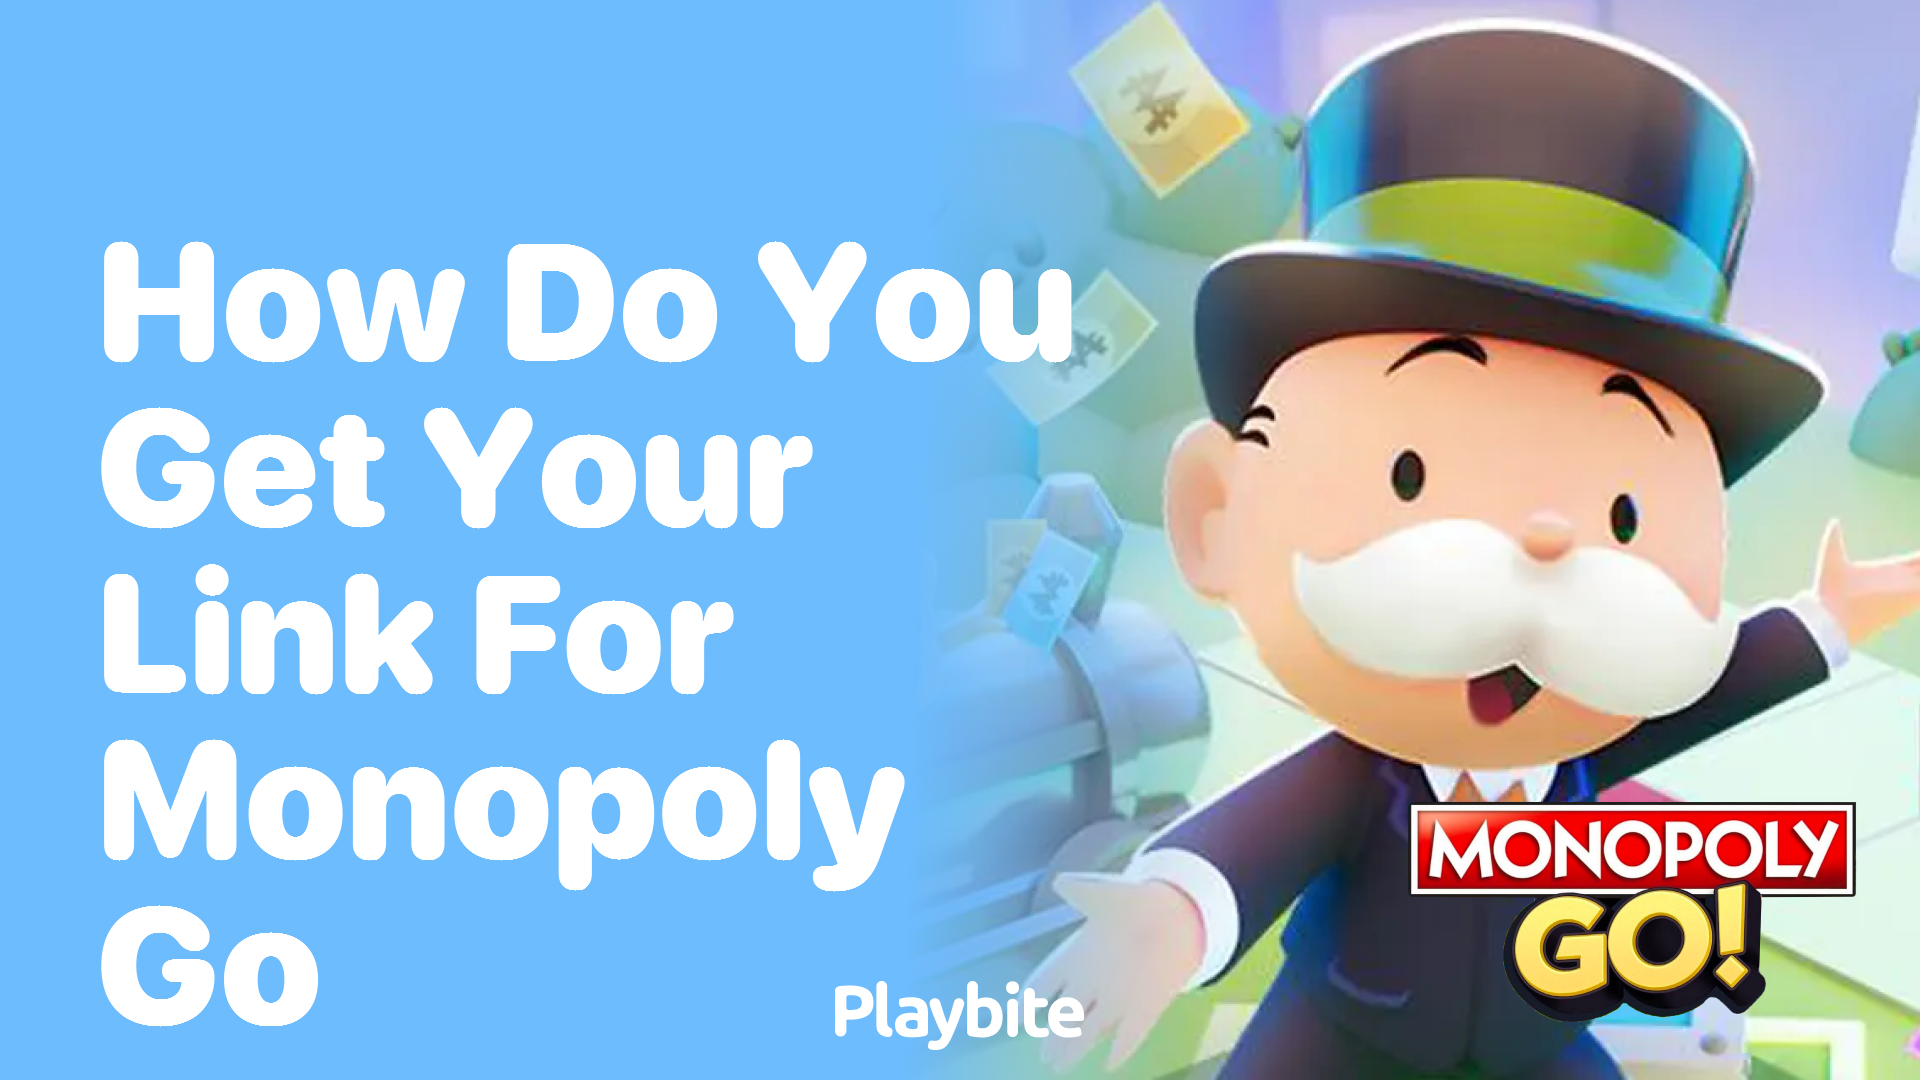 How Do You Get Your Link for Monopoly Go?